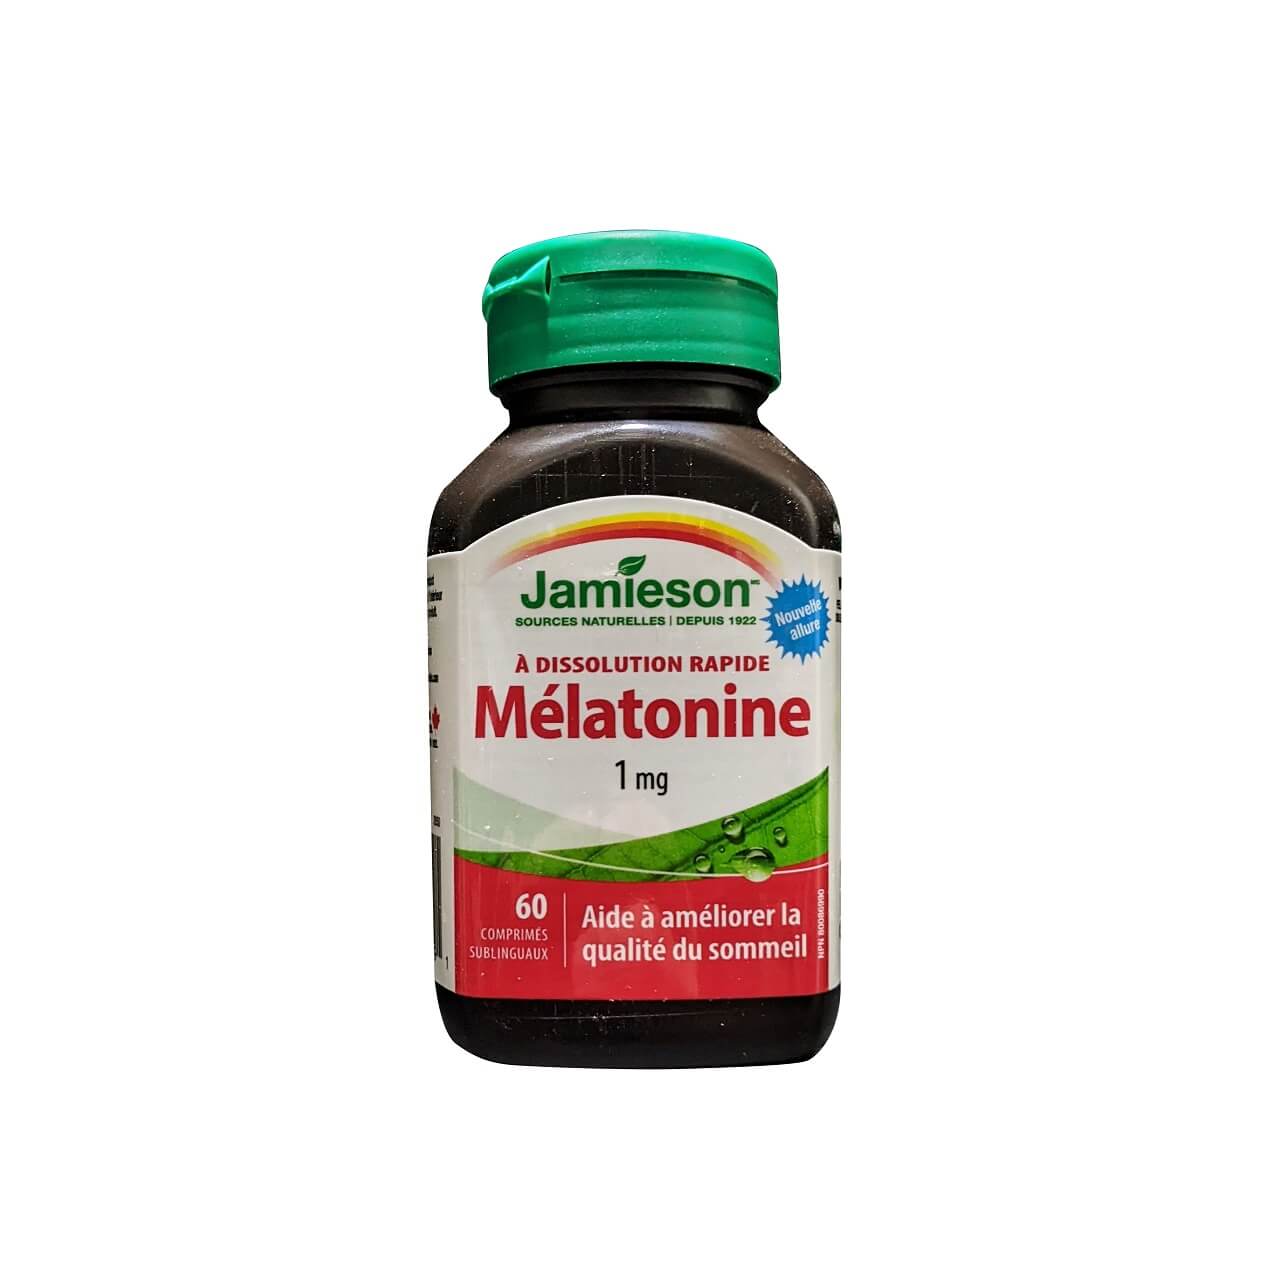 Product label for Jamieson Melatonin 1 mg Fast Dissolving (60 tablets) in French